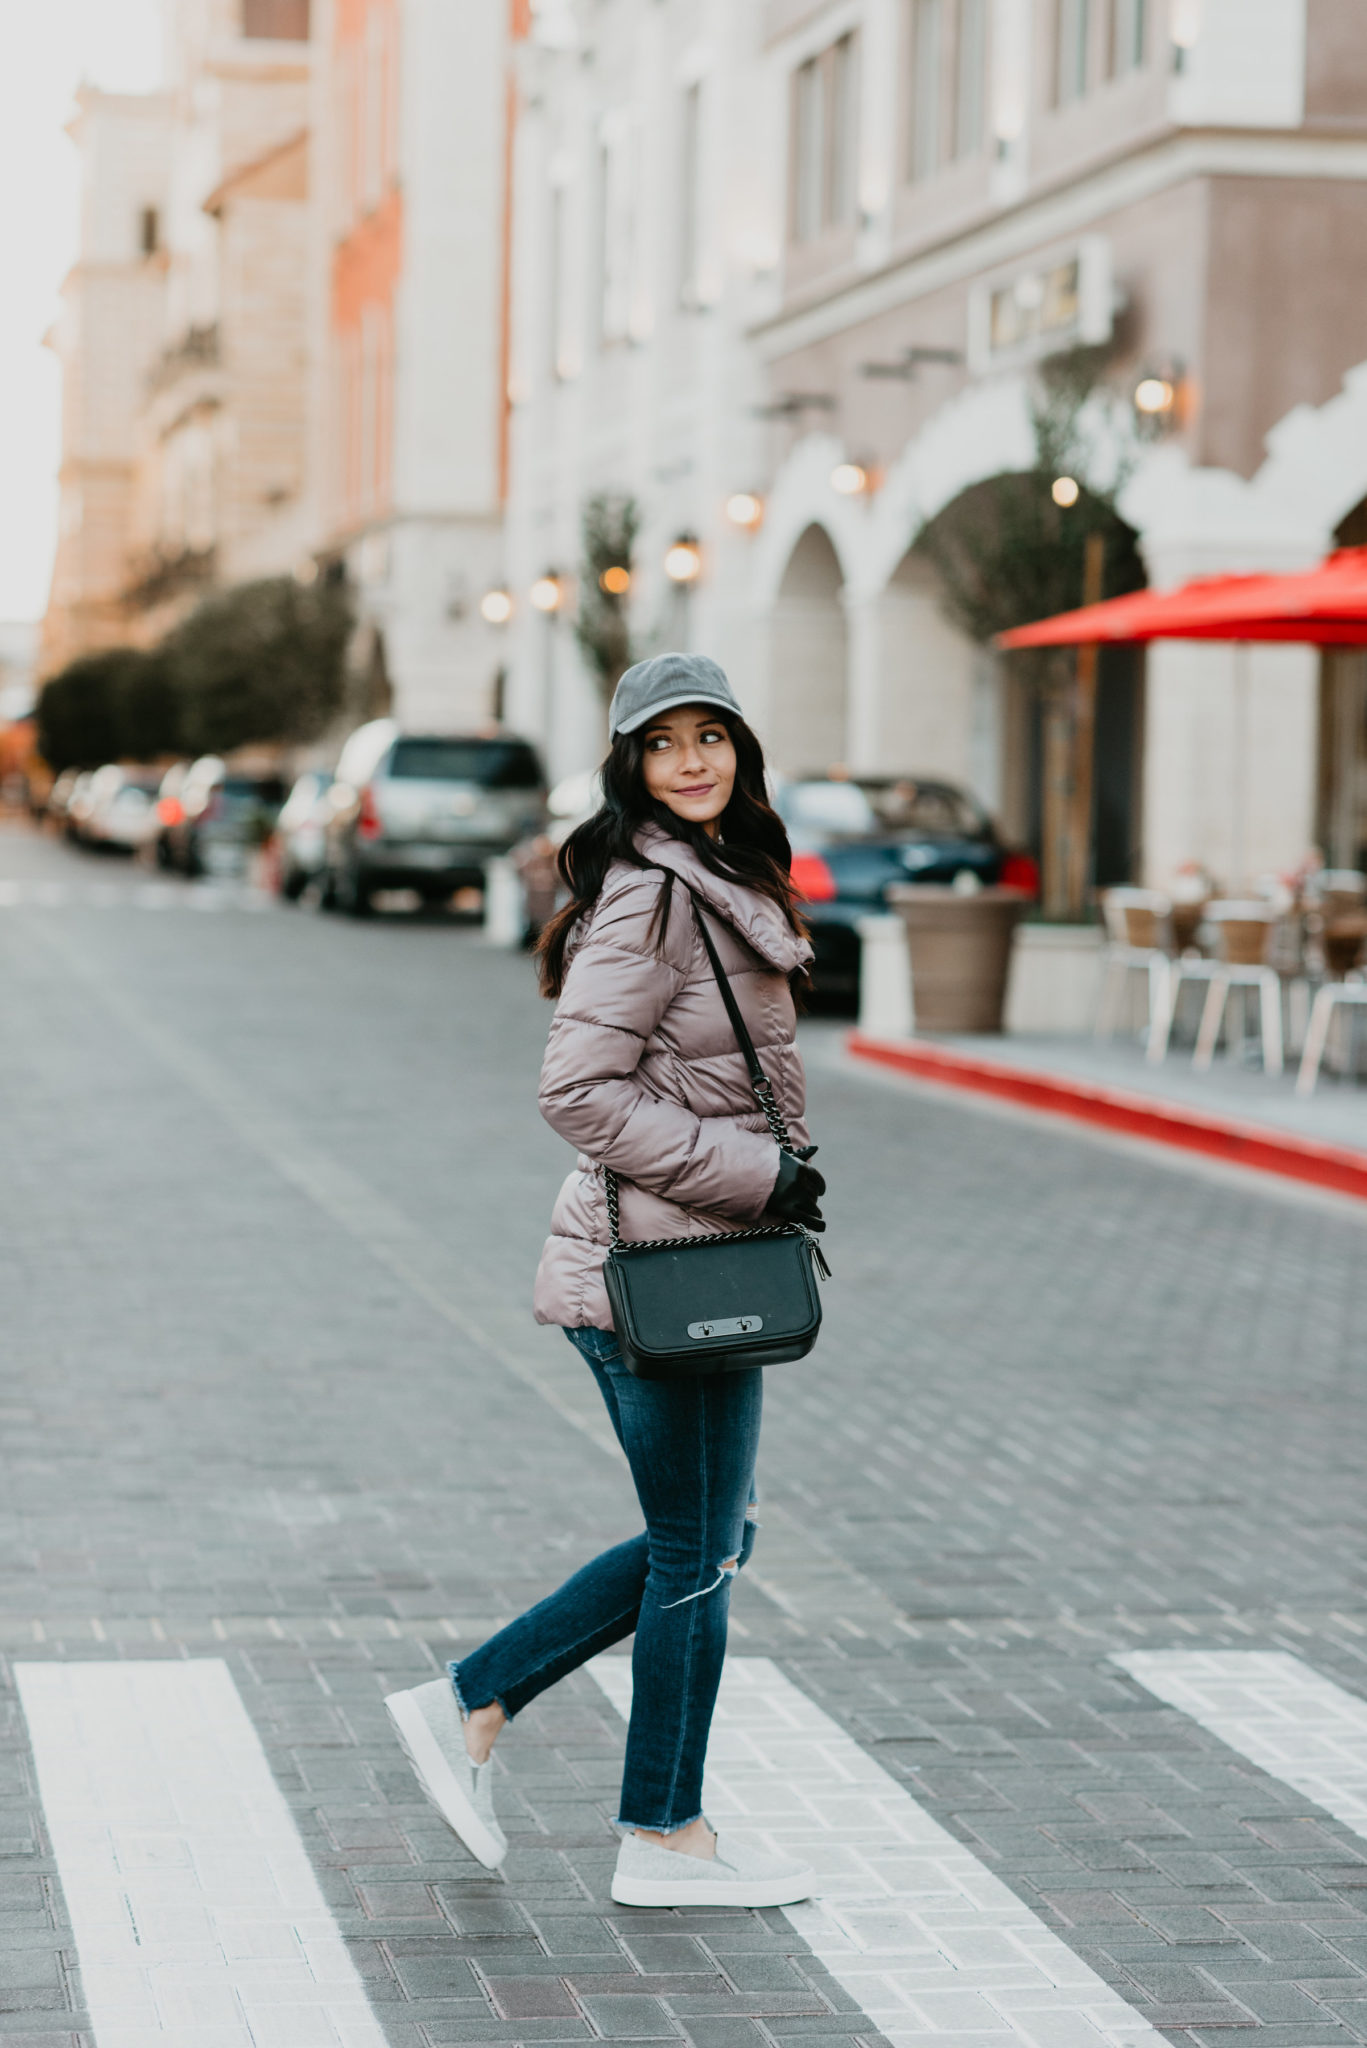 Stylish Outfits for Winter in Las Vegas